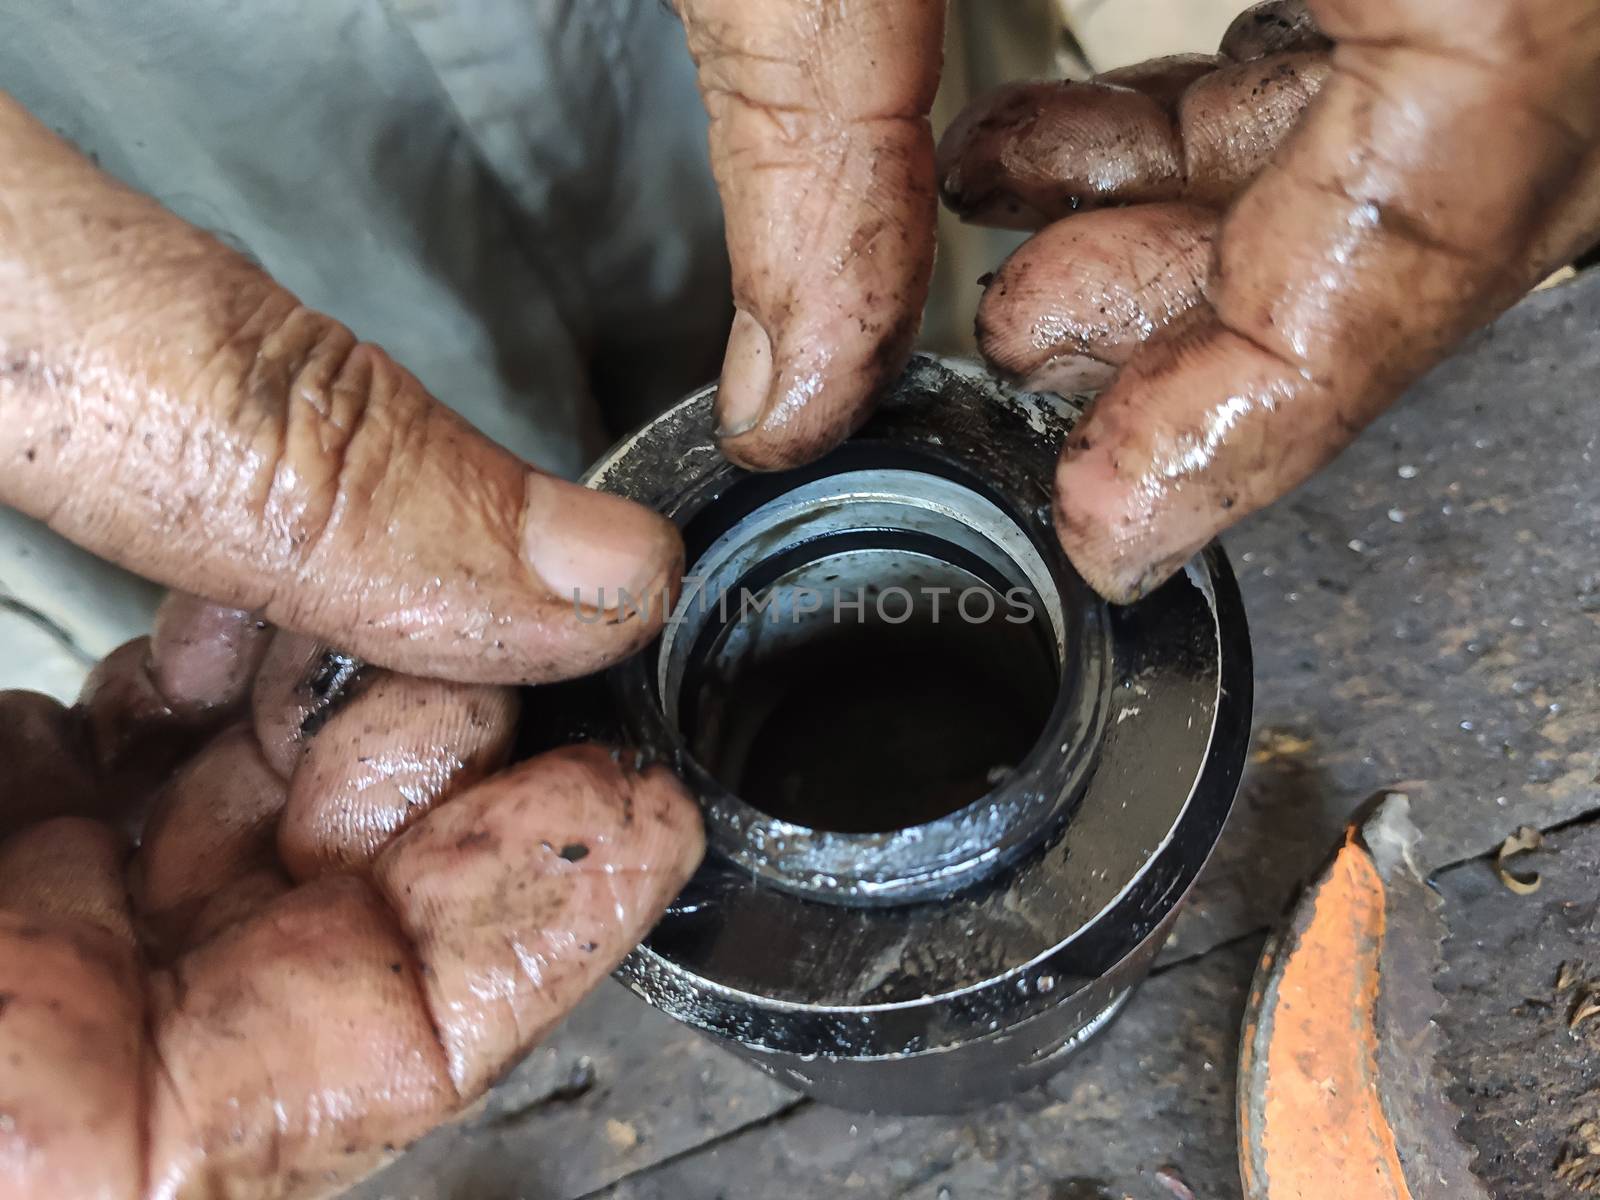 Dirty mechanic's hands work on a small metalwork piece